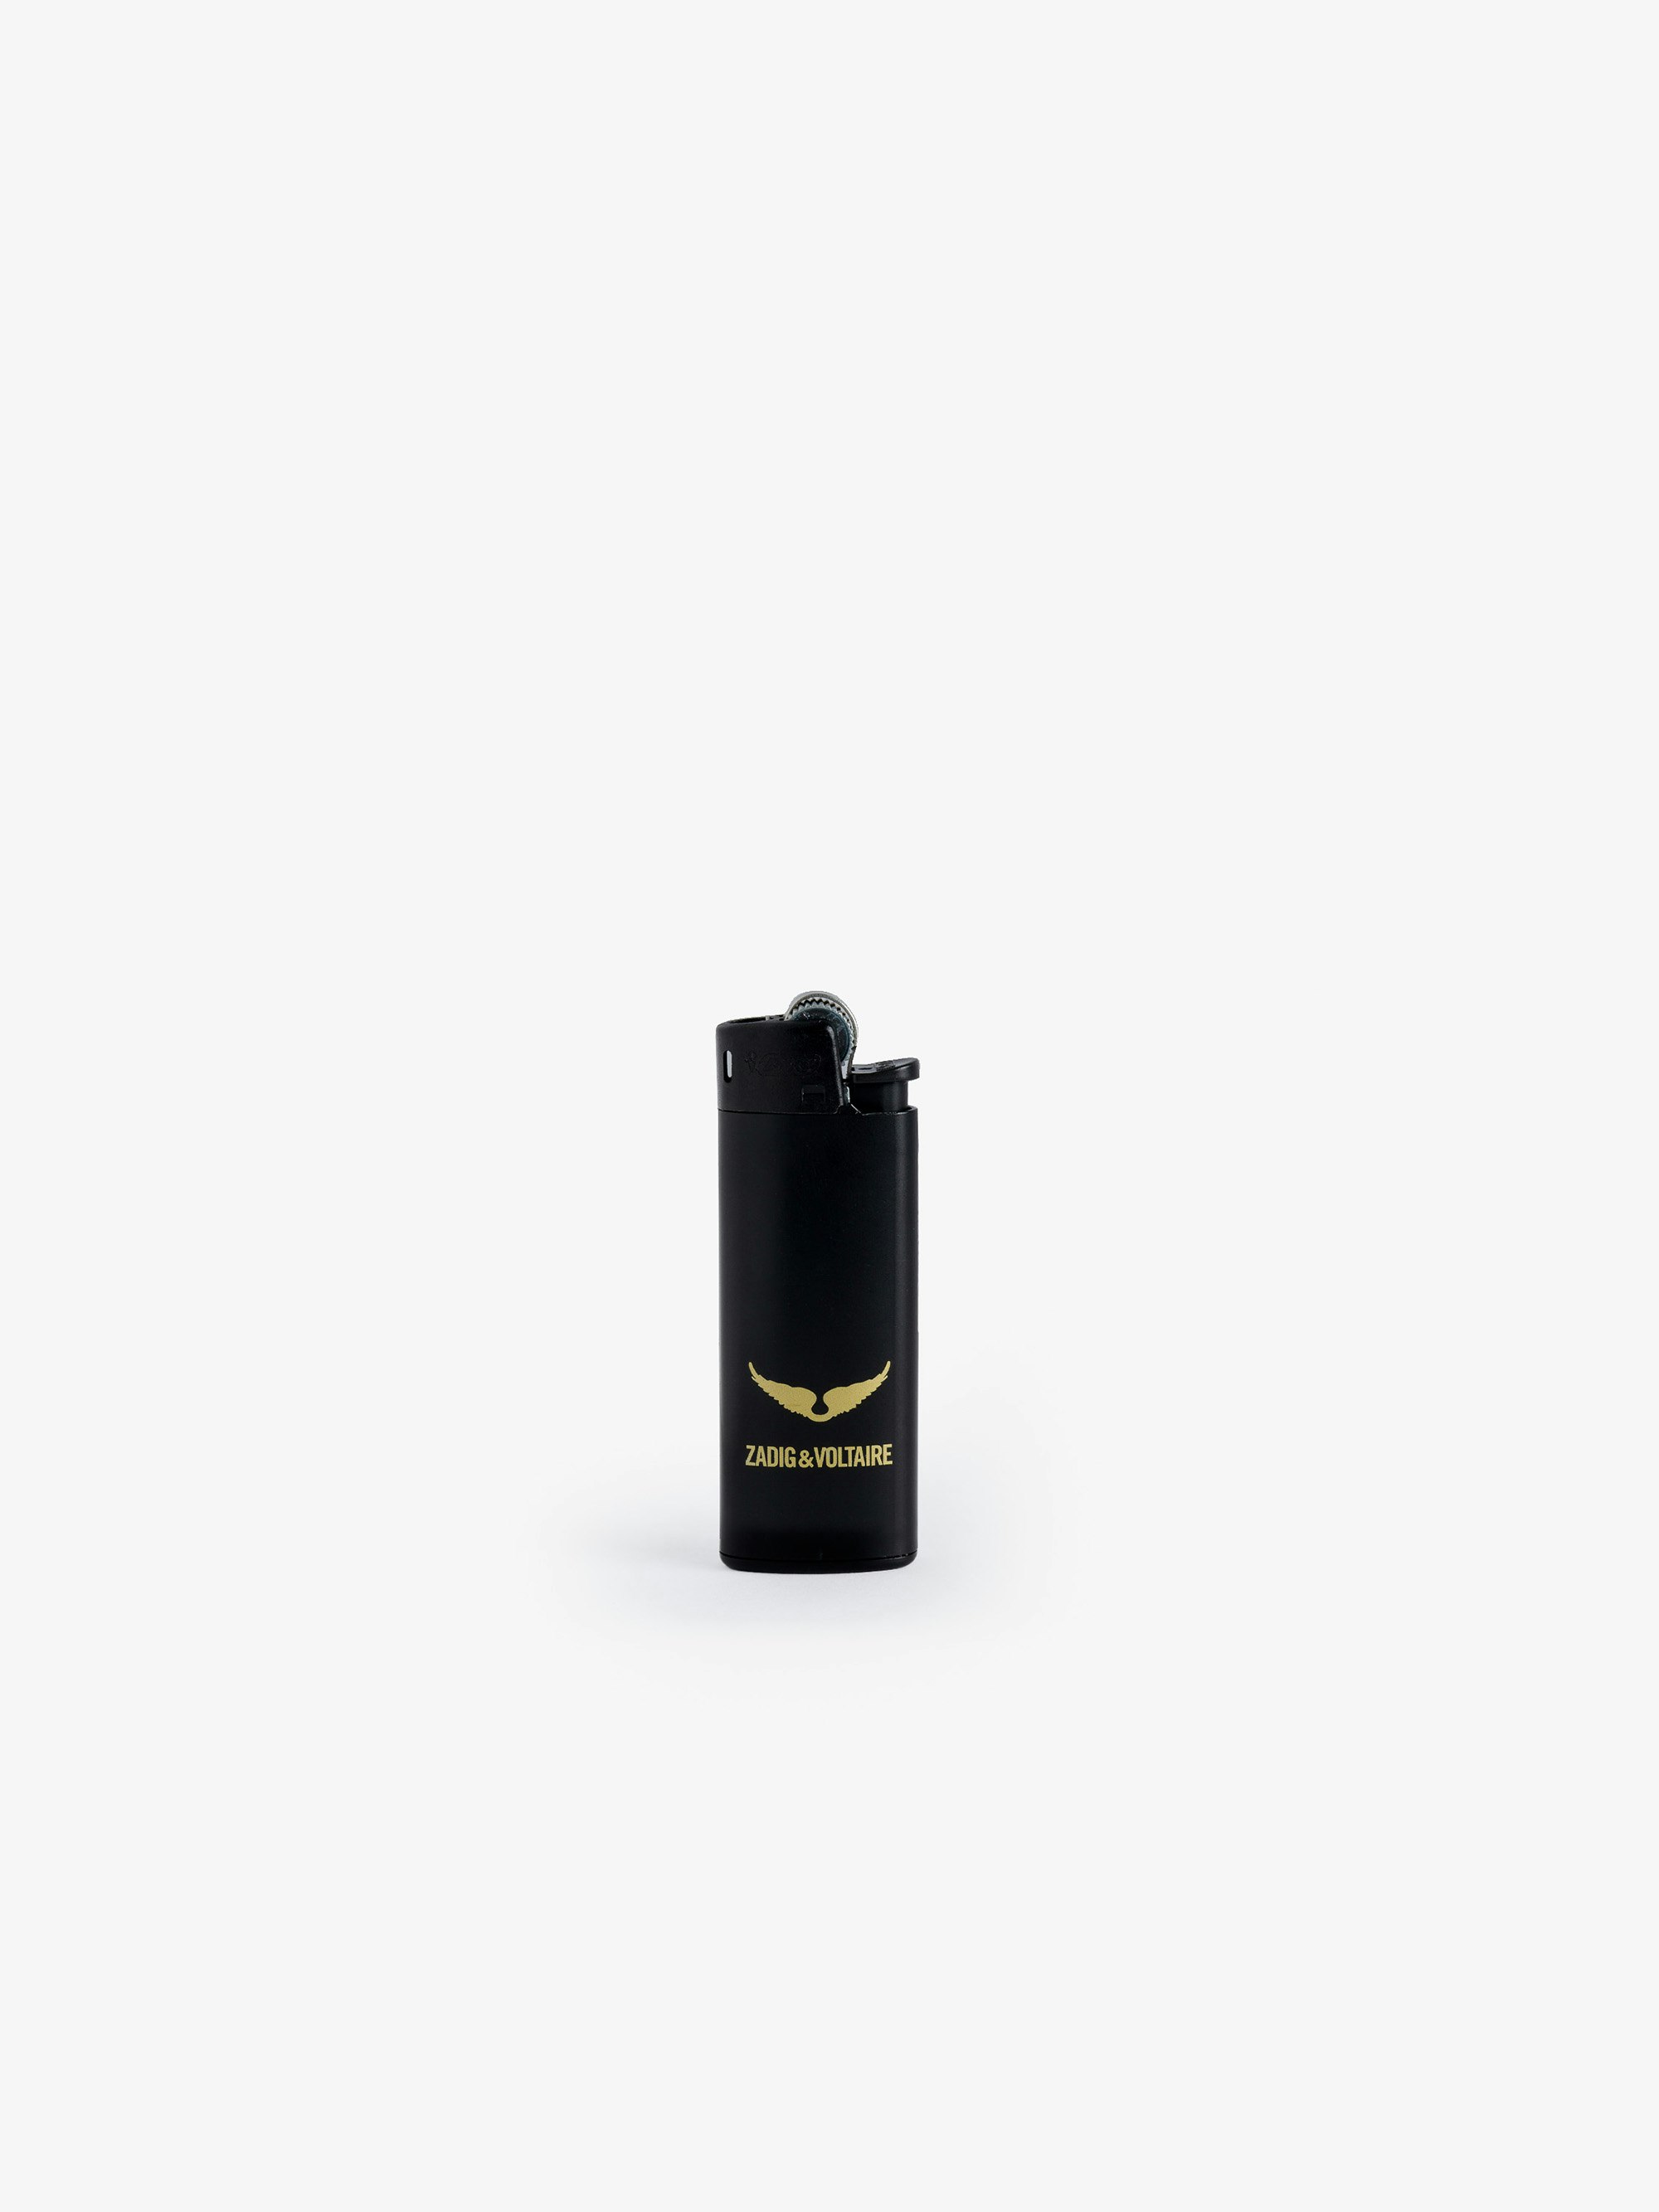 Flame of Love Lighter - Voltaire Vice black and contrasting gold-tone lighter decorated with messages, wings motif and Zadig&Voltaire signature.